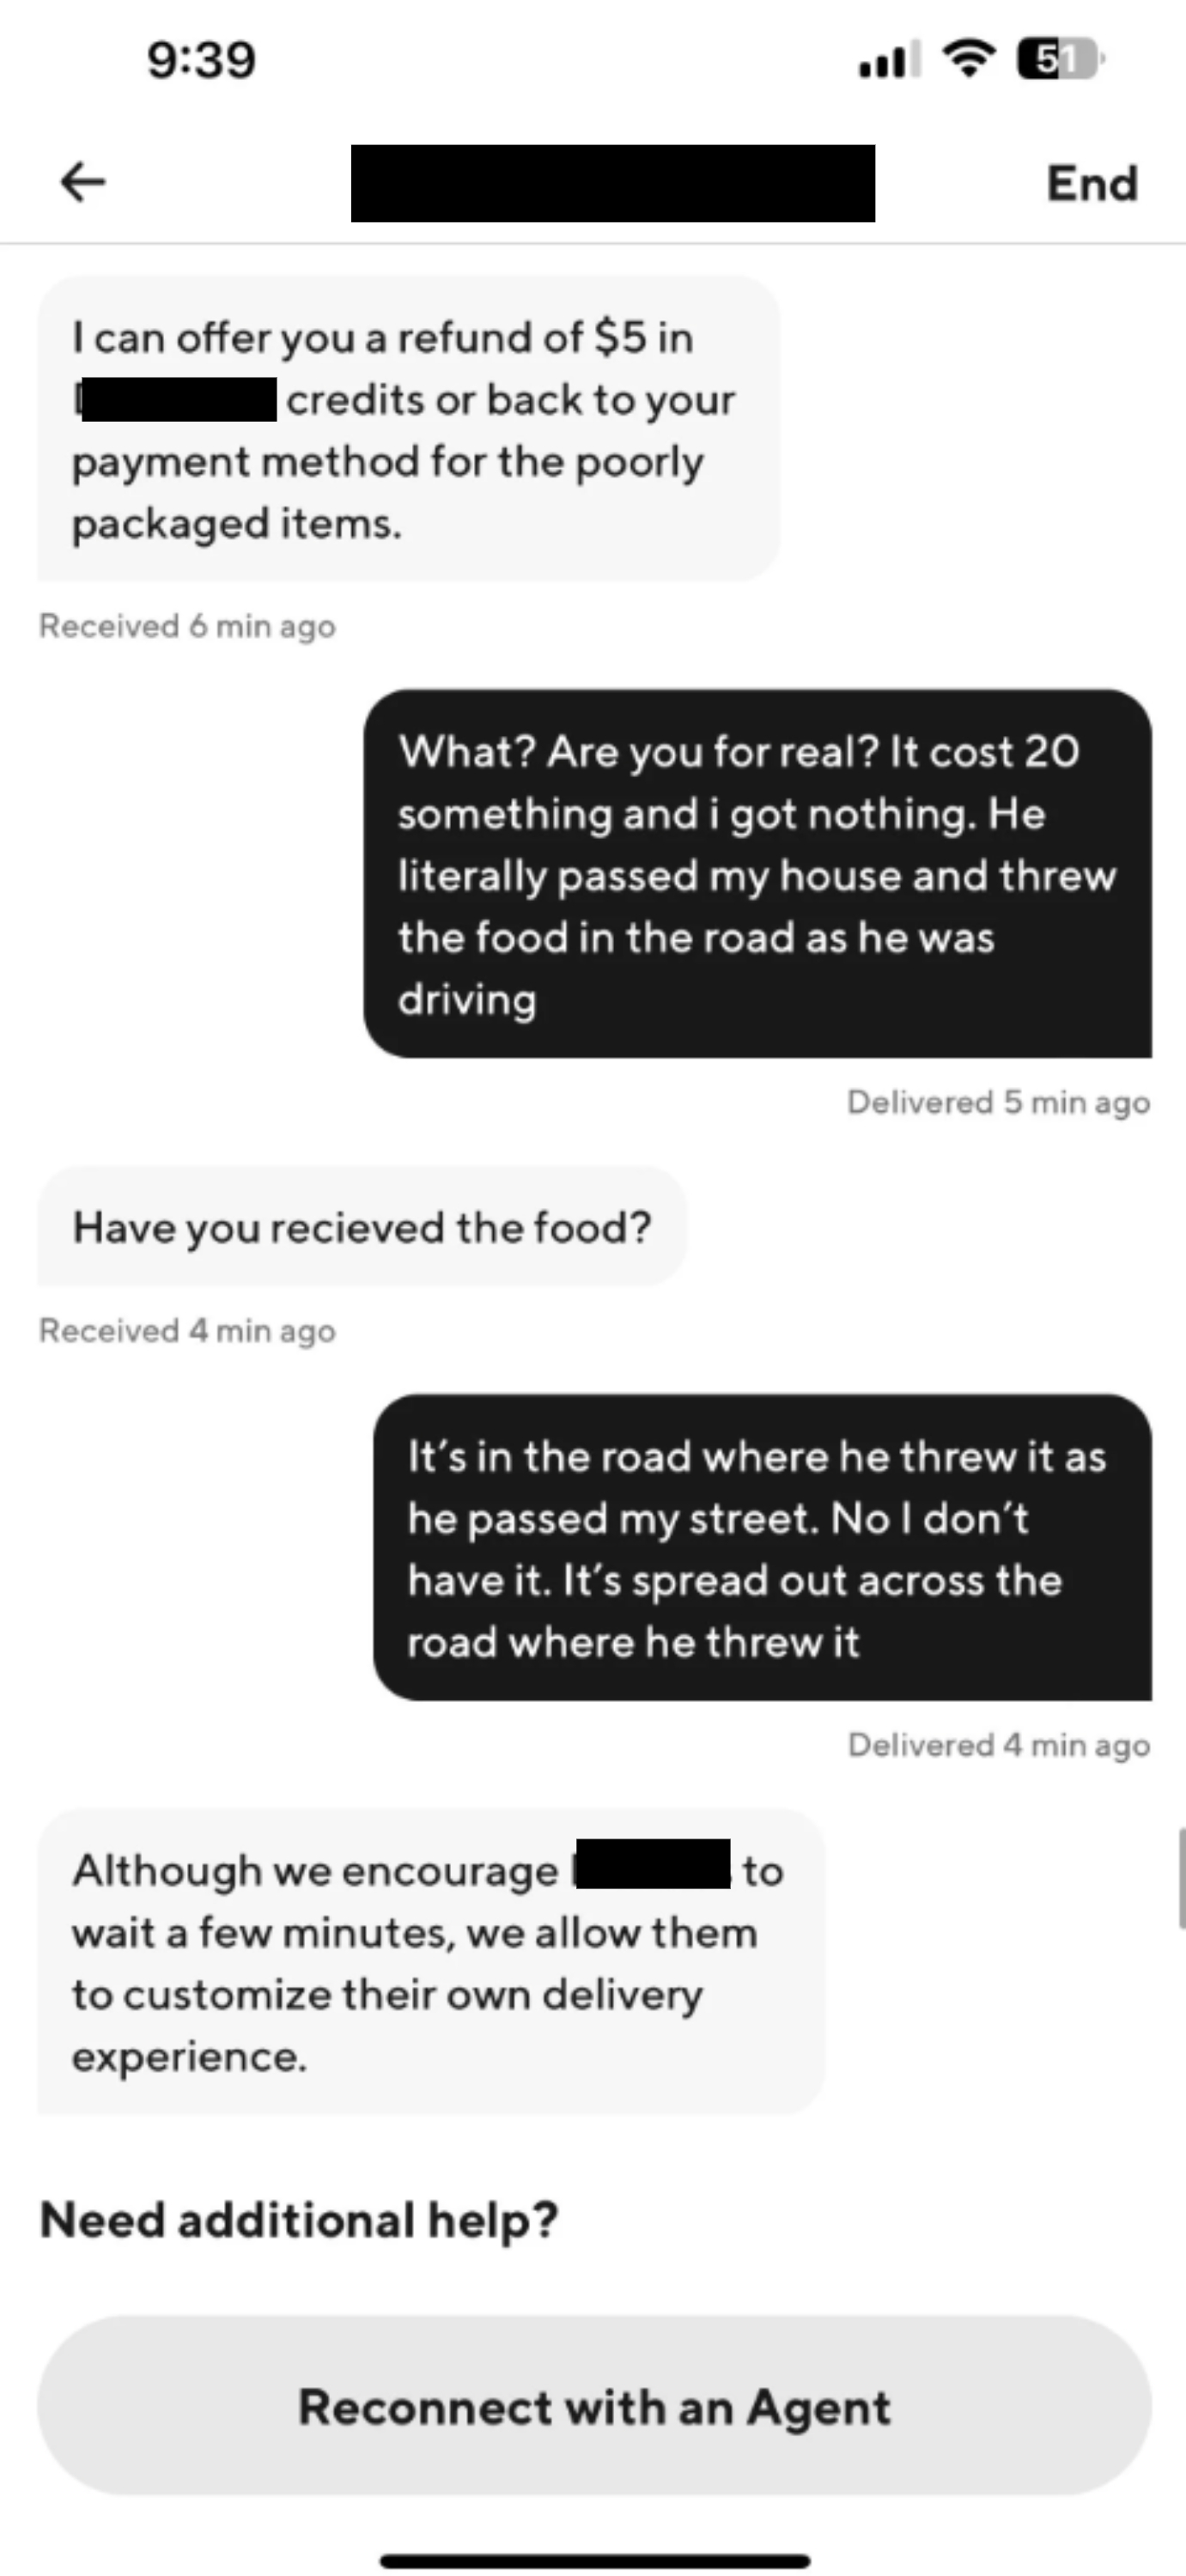 customer service telling the person that even though the driver threw the food out their window, they encourage driver&#x27;s to customize their own delivery experience